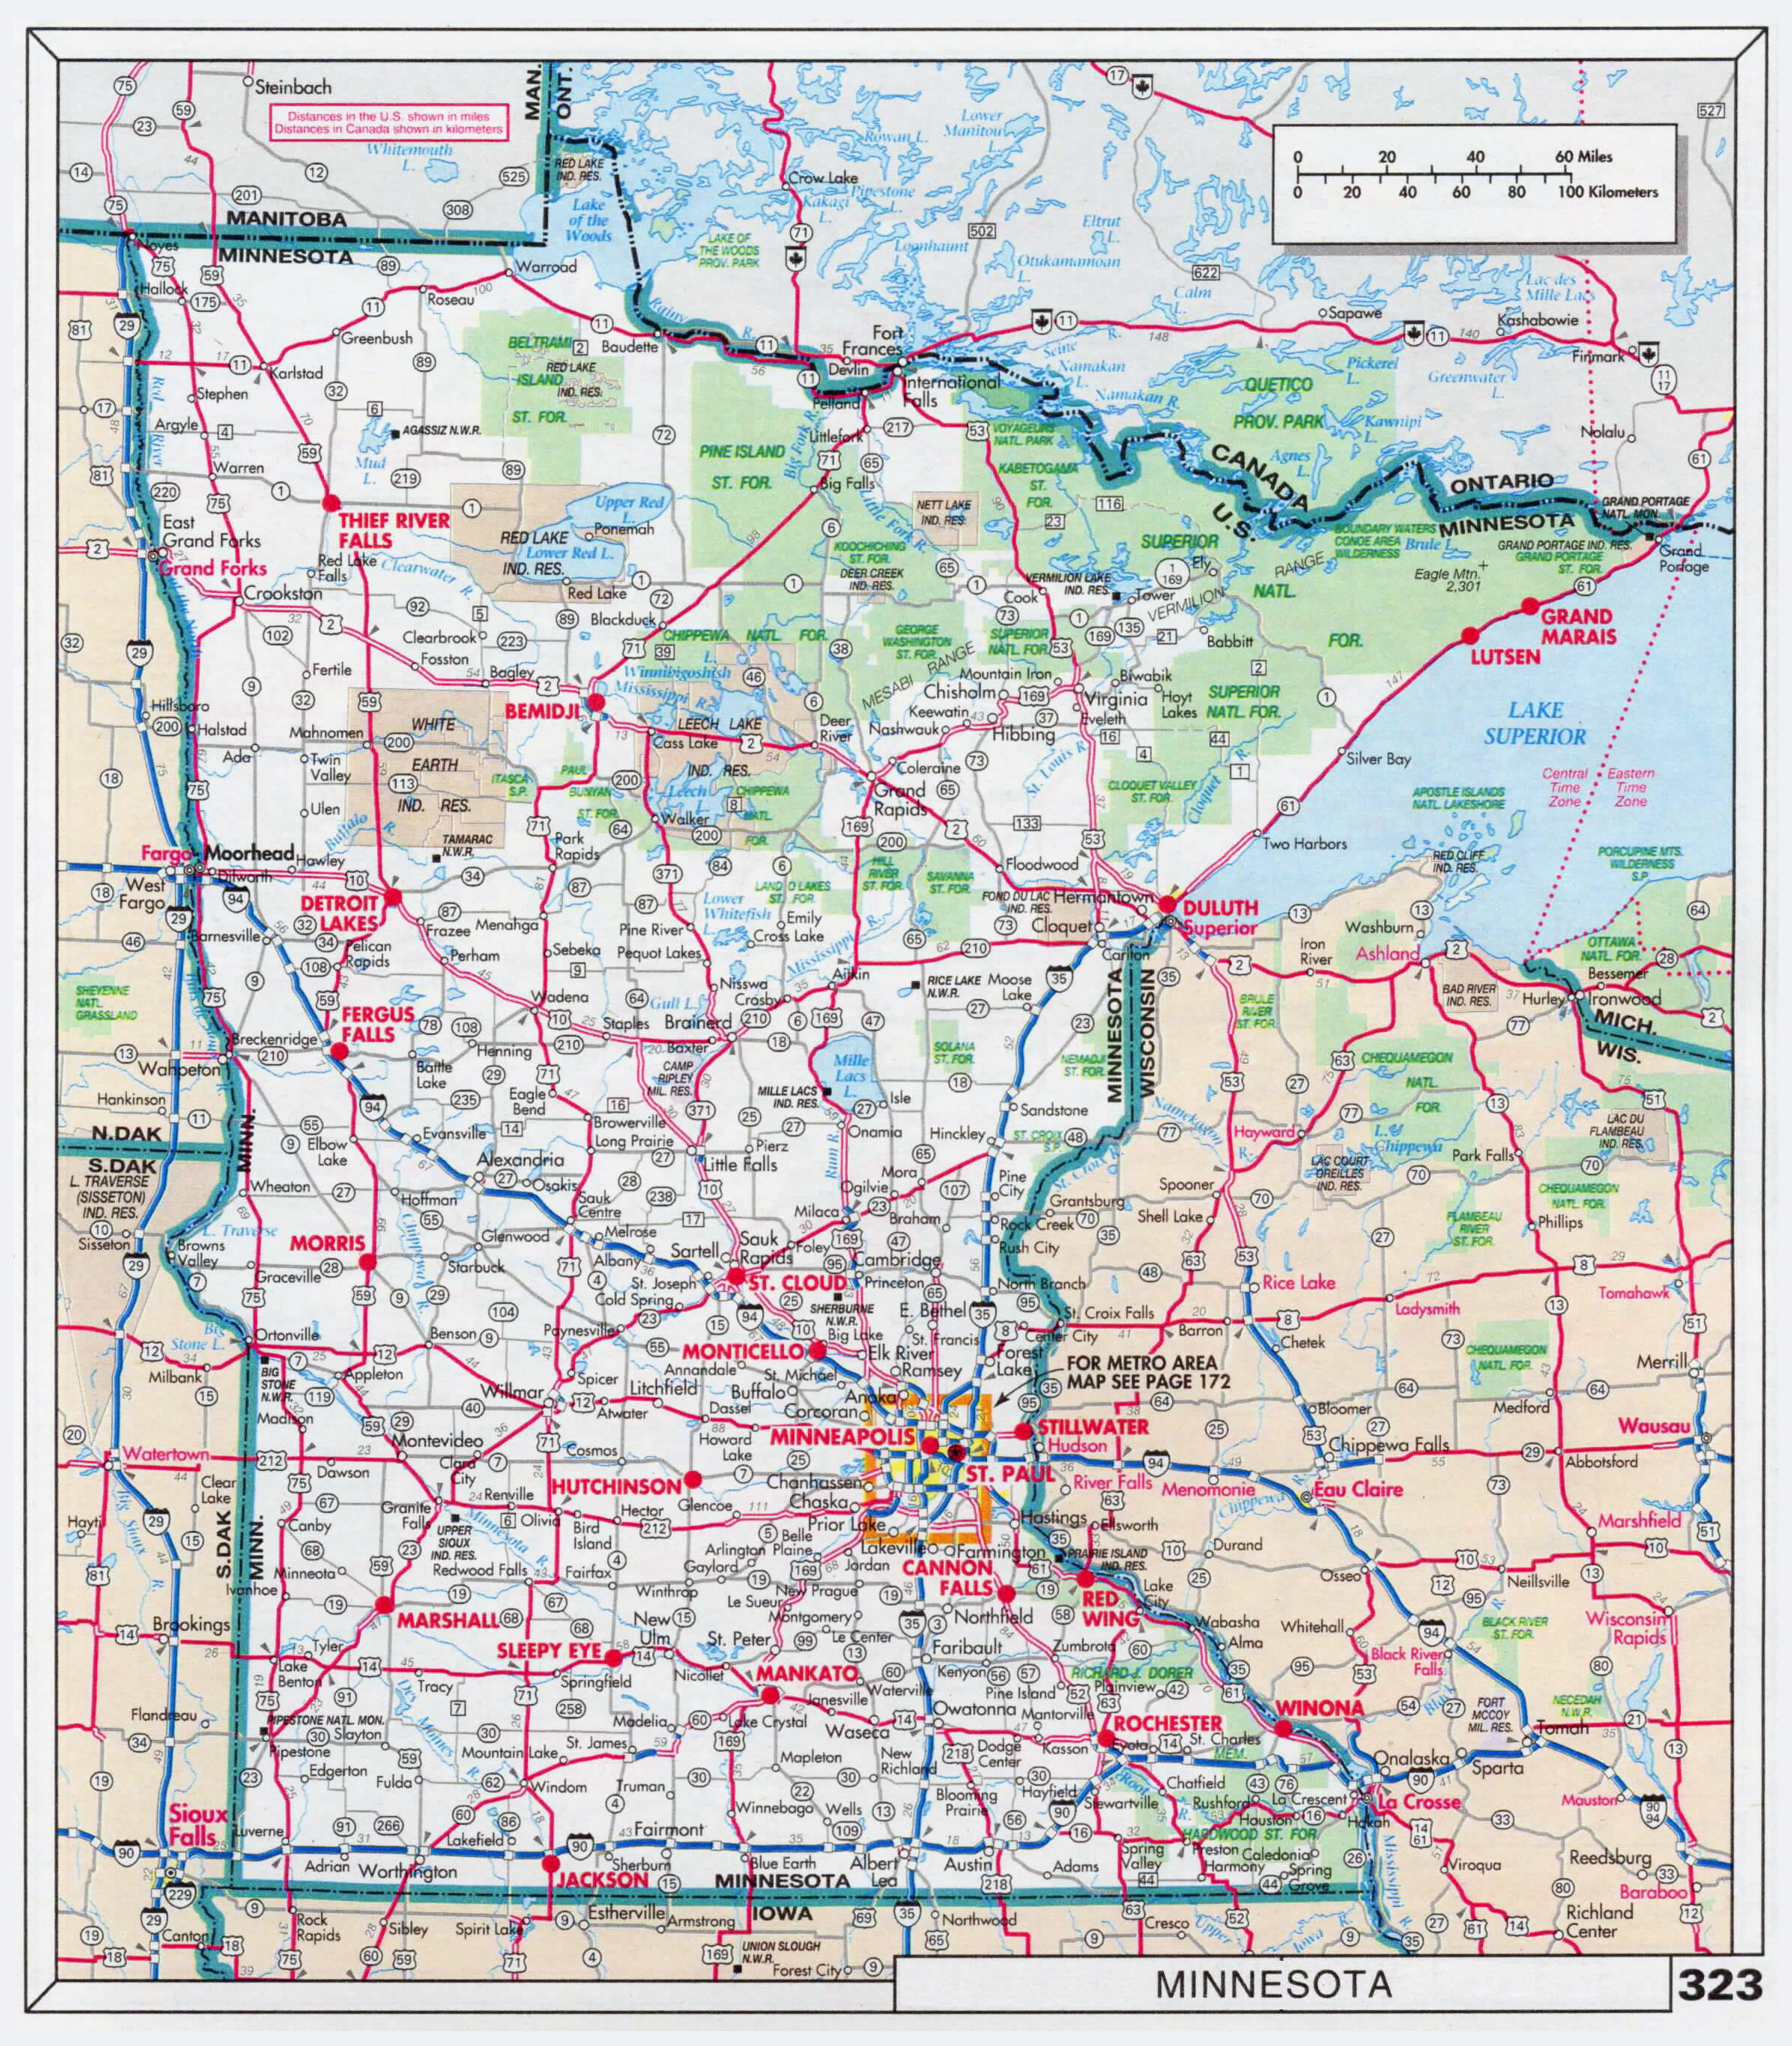 large-scale-roads-and-highways-map-of-minnesota-state-with-national